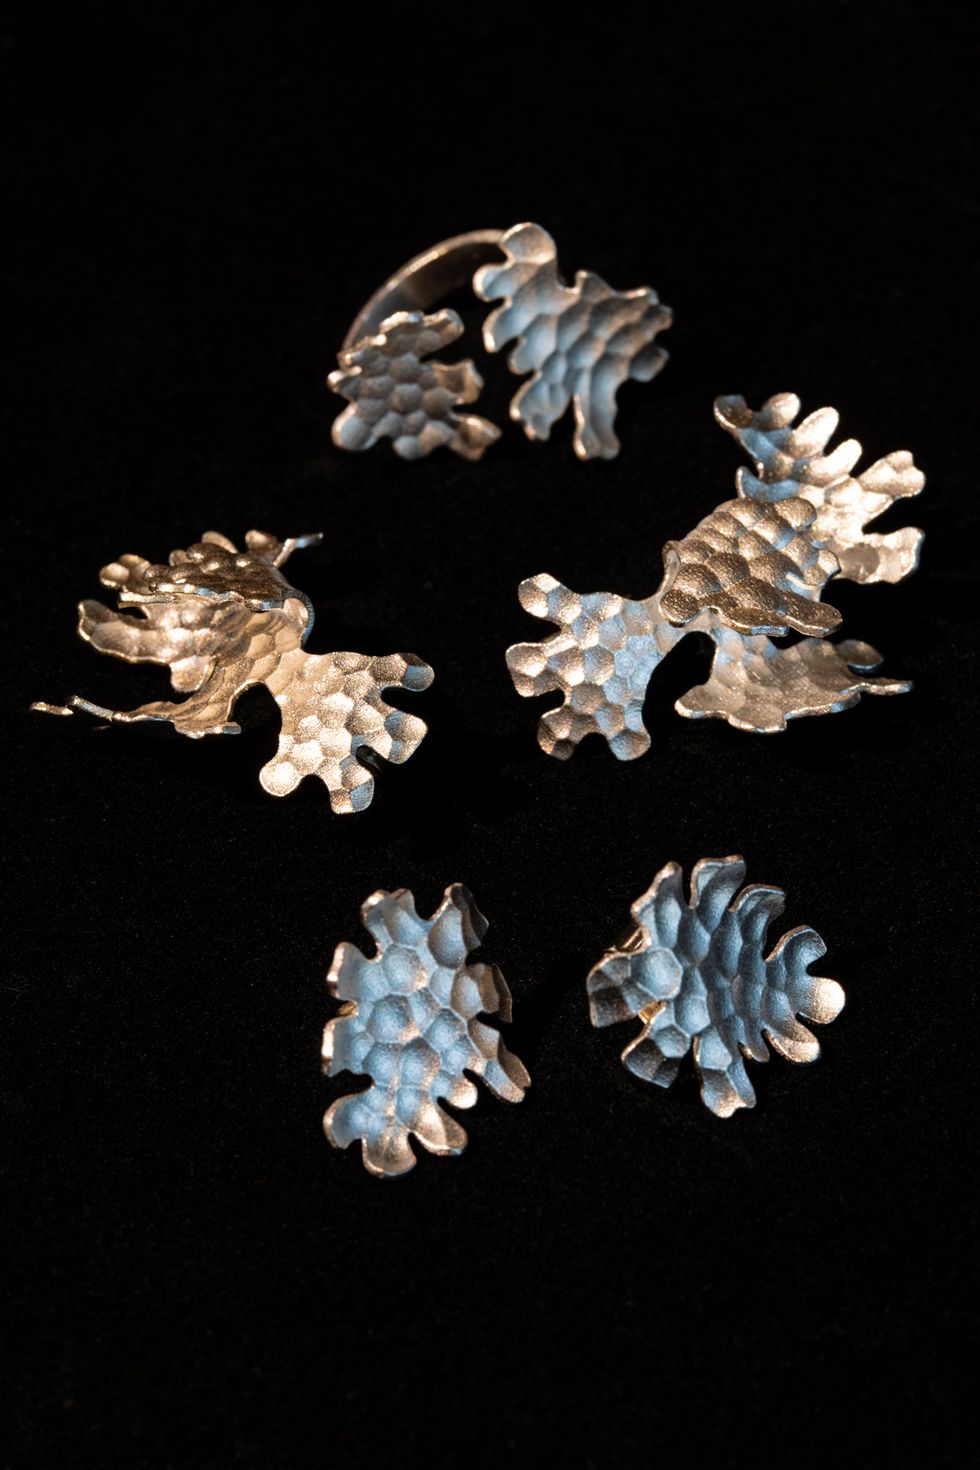 a group of blue and white crystals